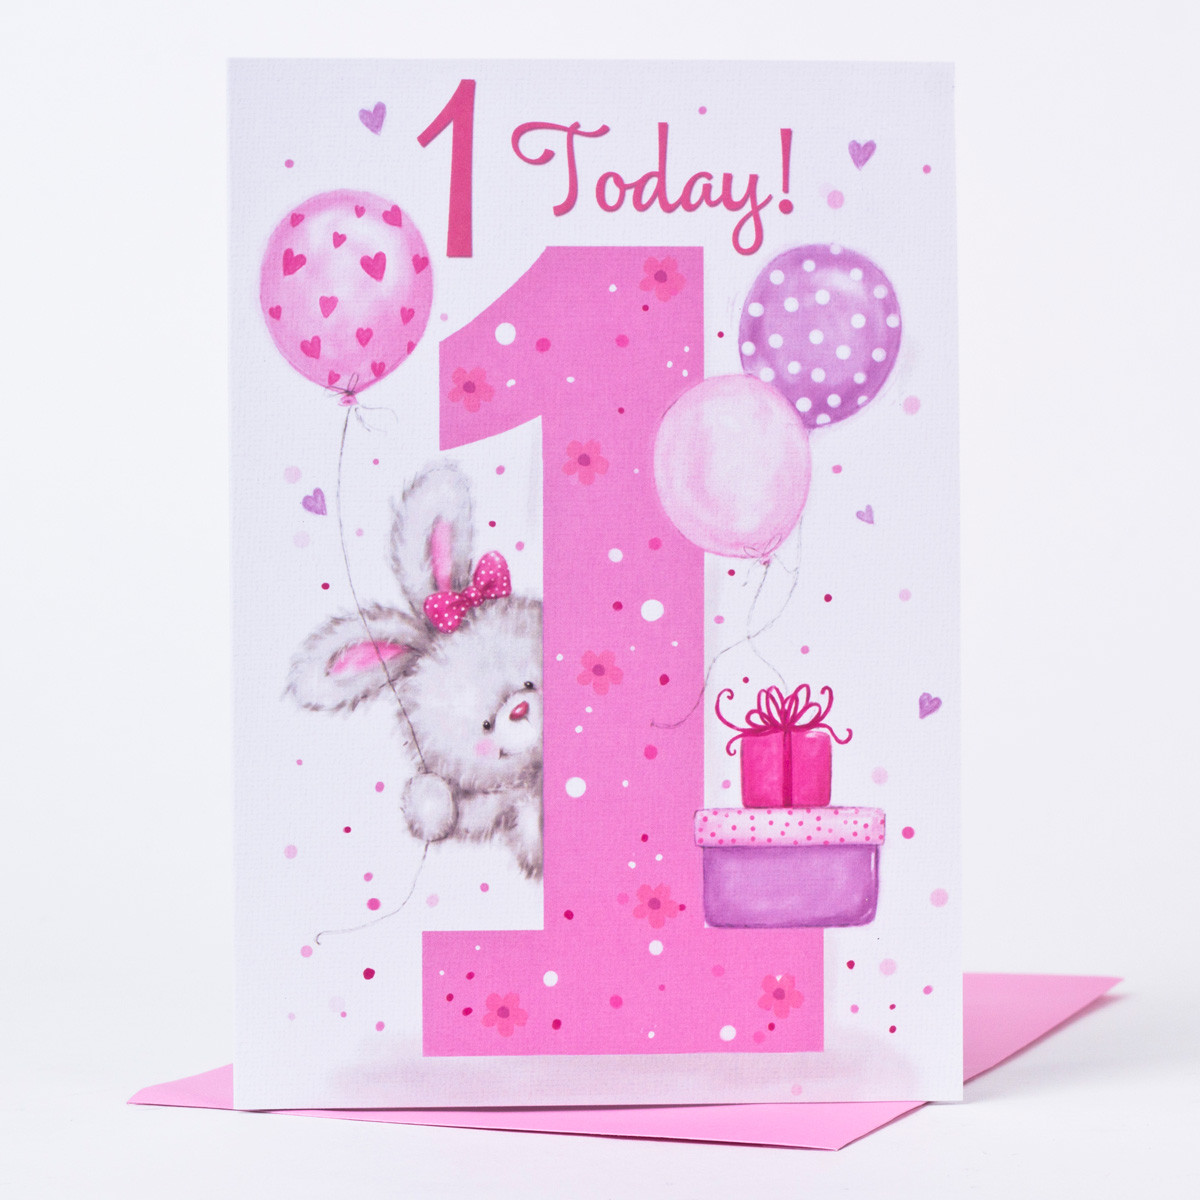 Best ideas about First Birthday Card
. Save or Pin 1st Birthday Card 1 Today Bunny Pink Now.